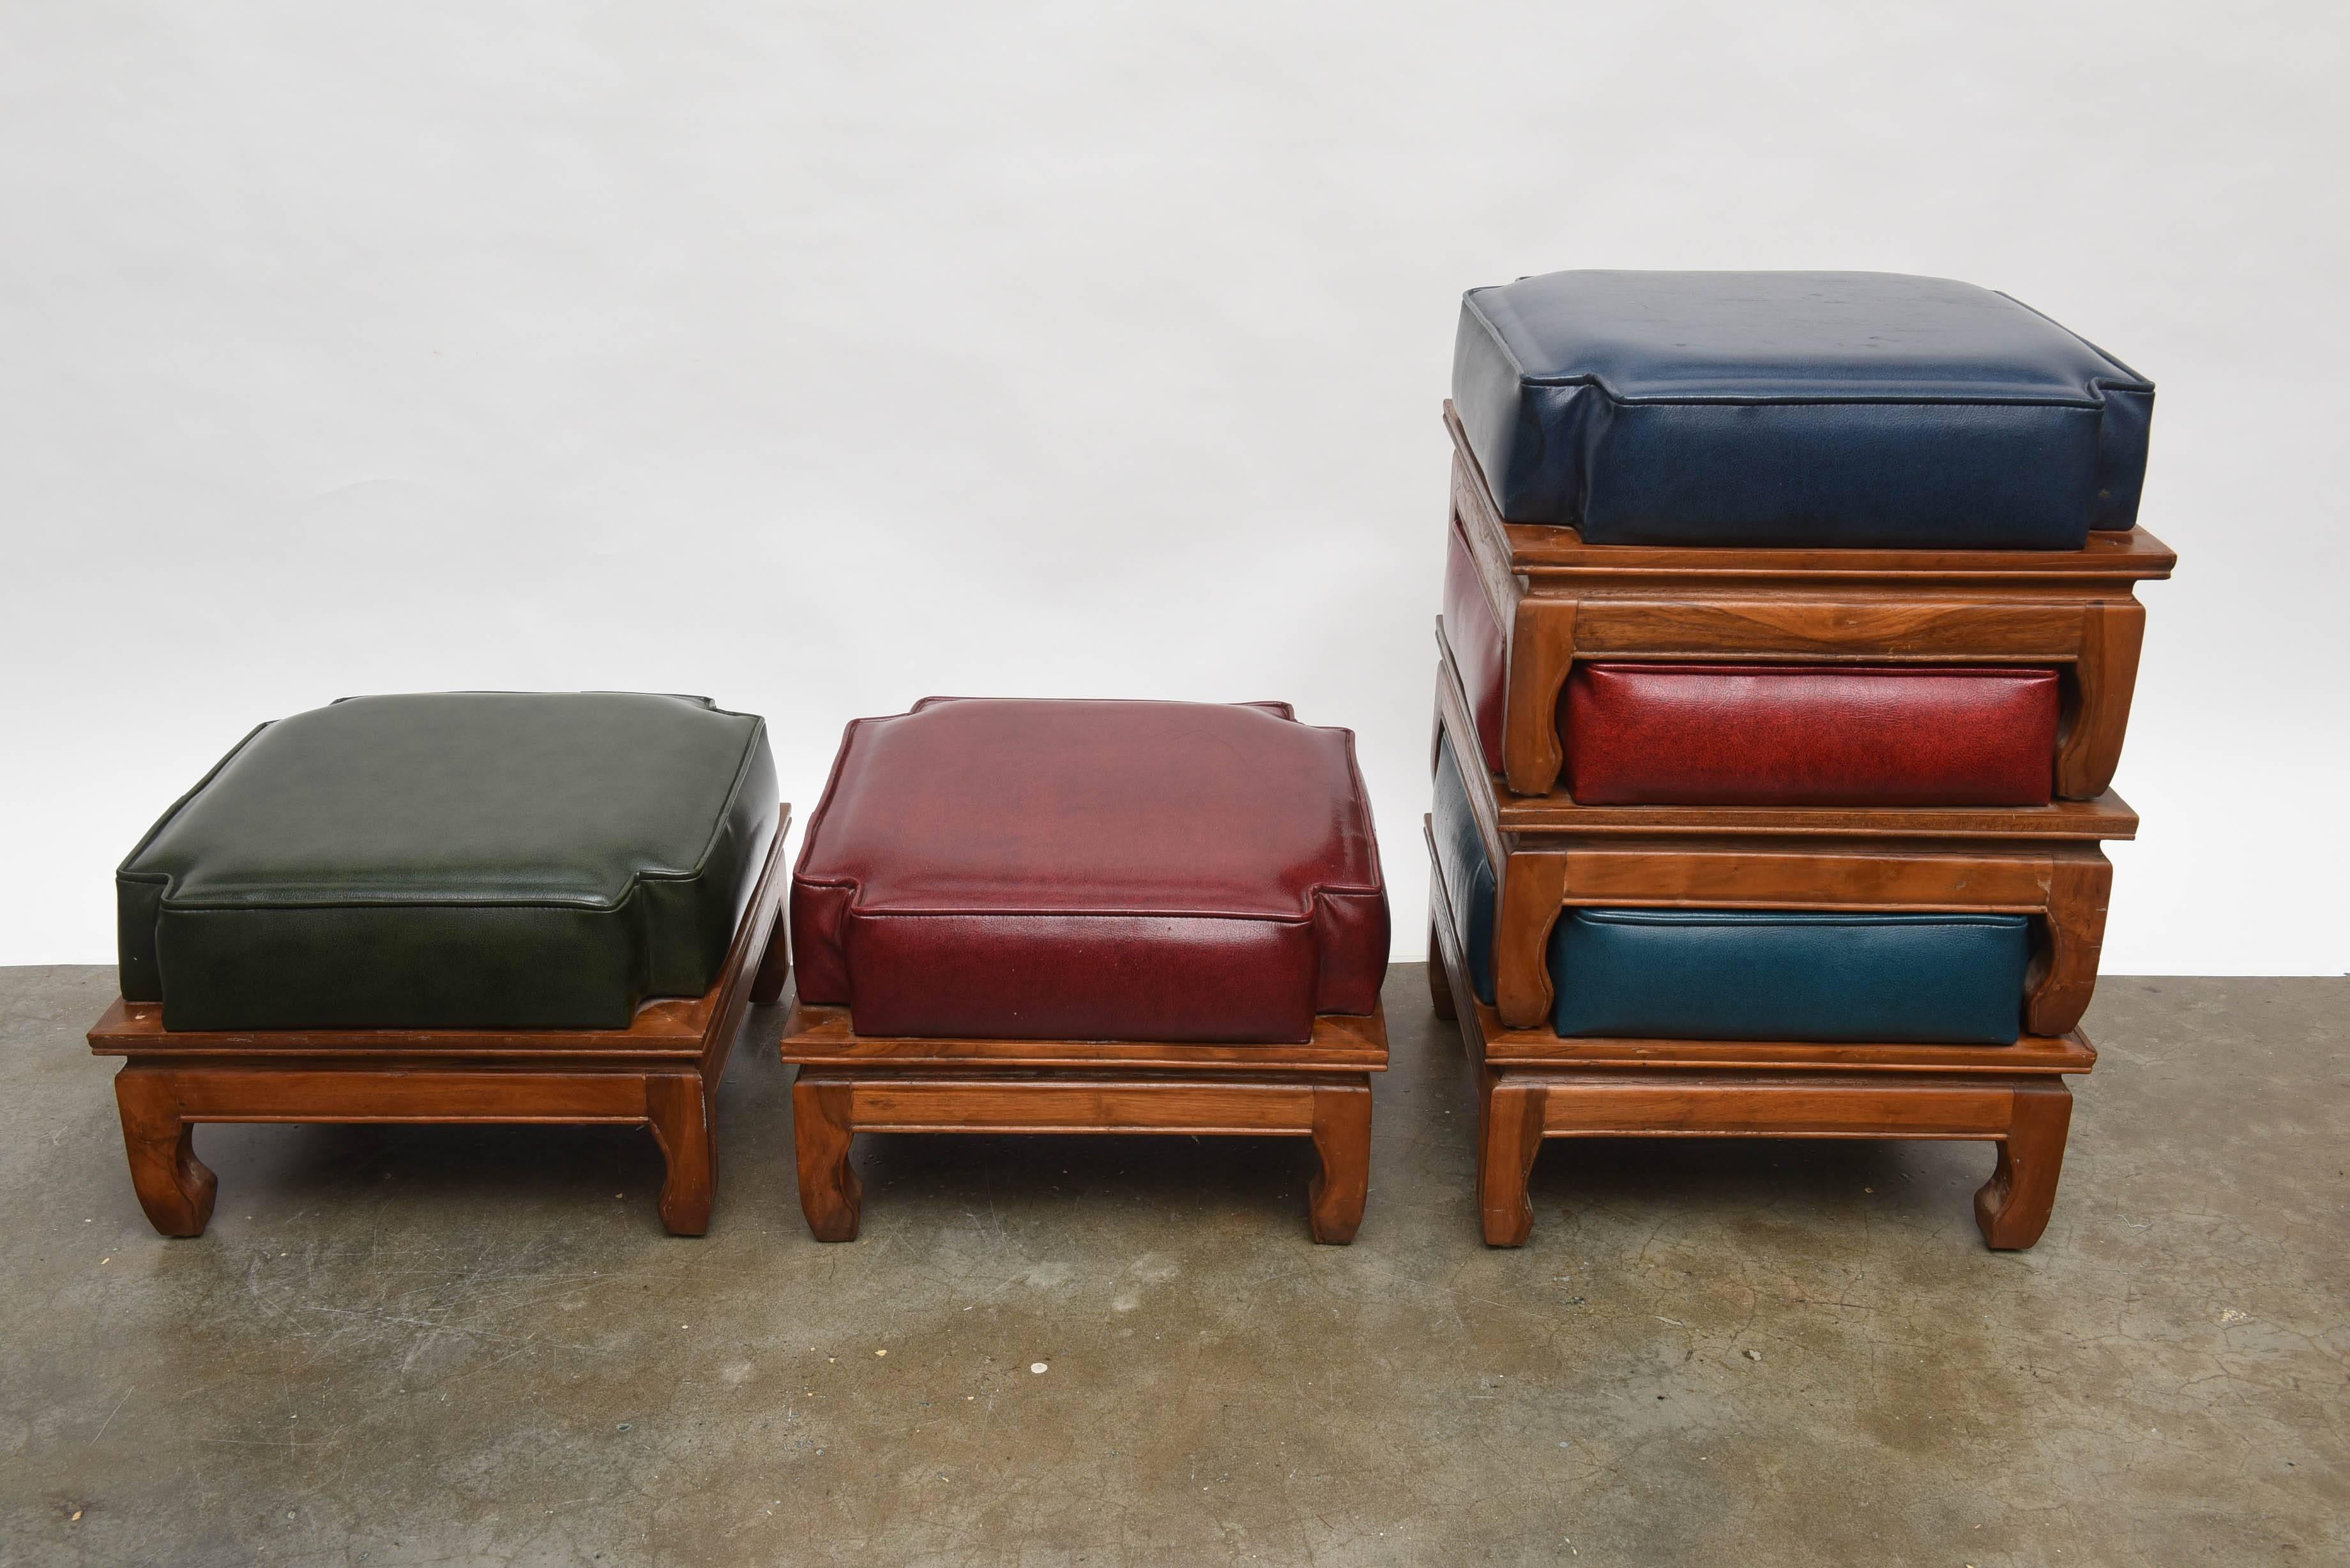 Mid-20th Century Mid-Century Modern Stacked Stools, Ottomans For Sale